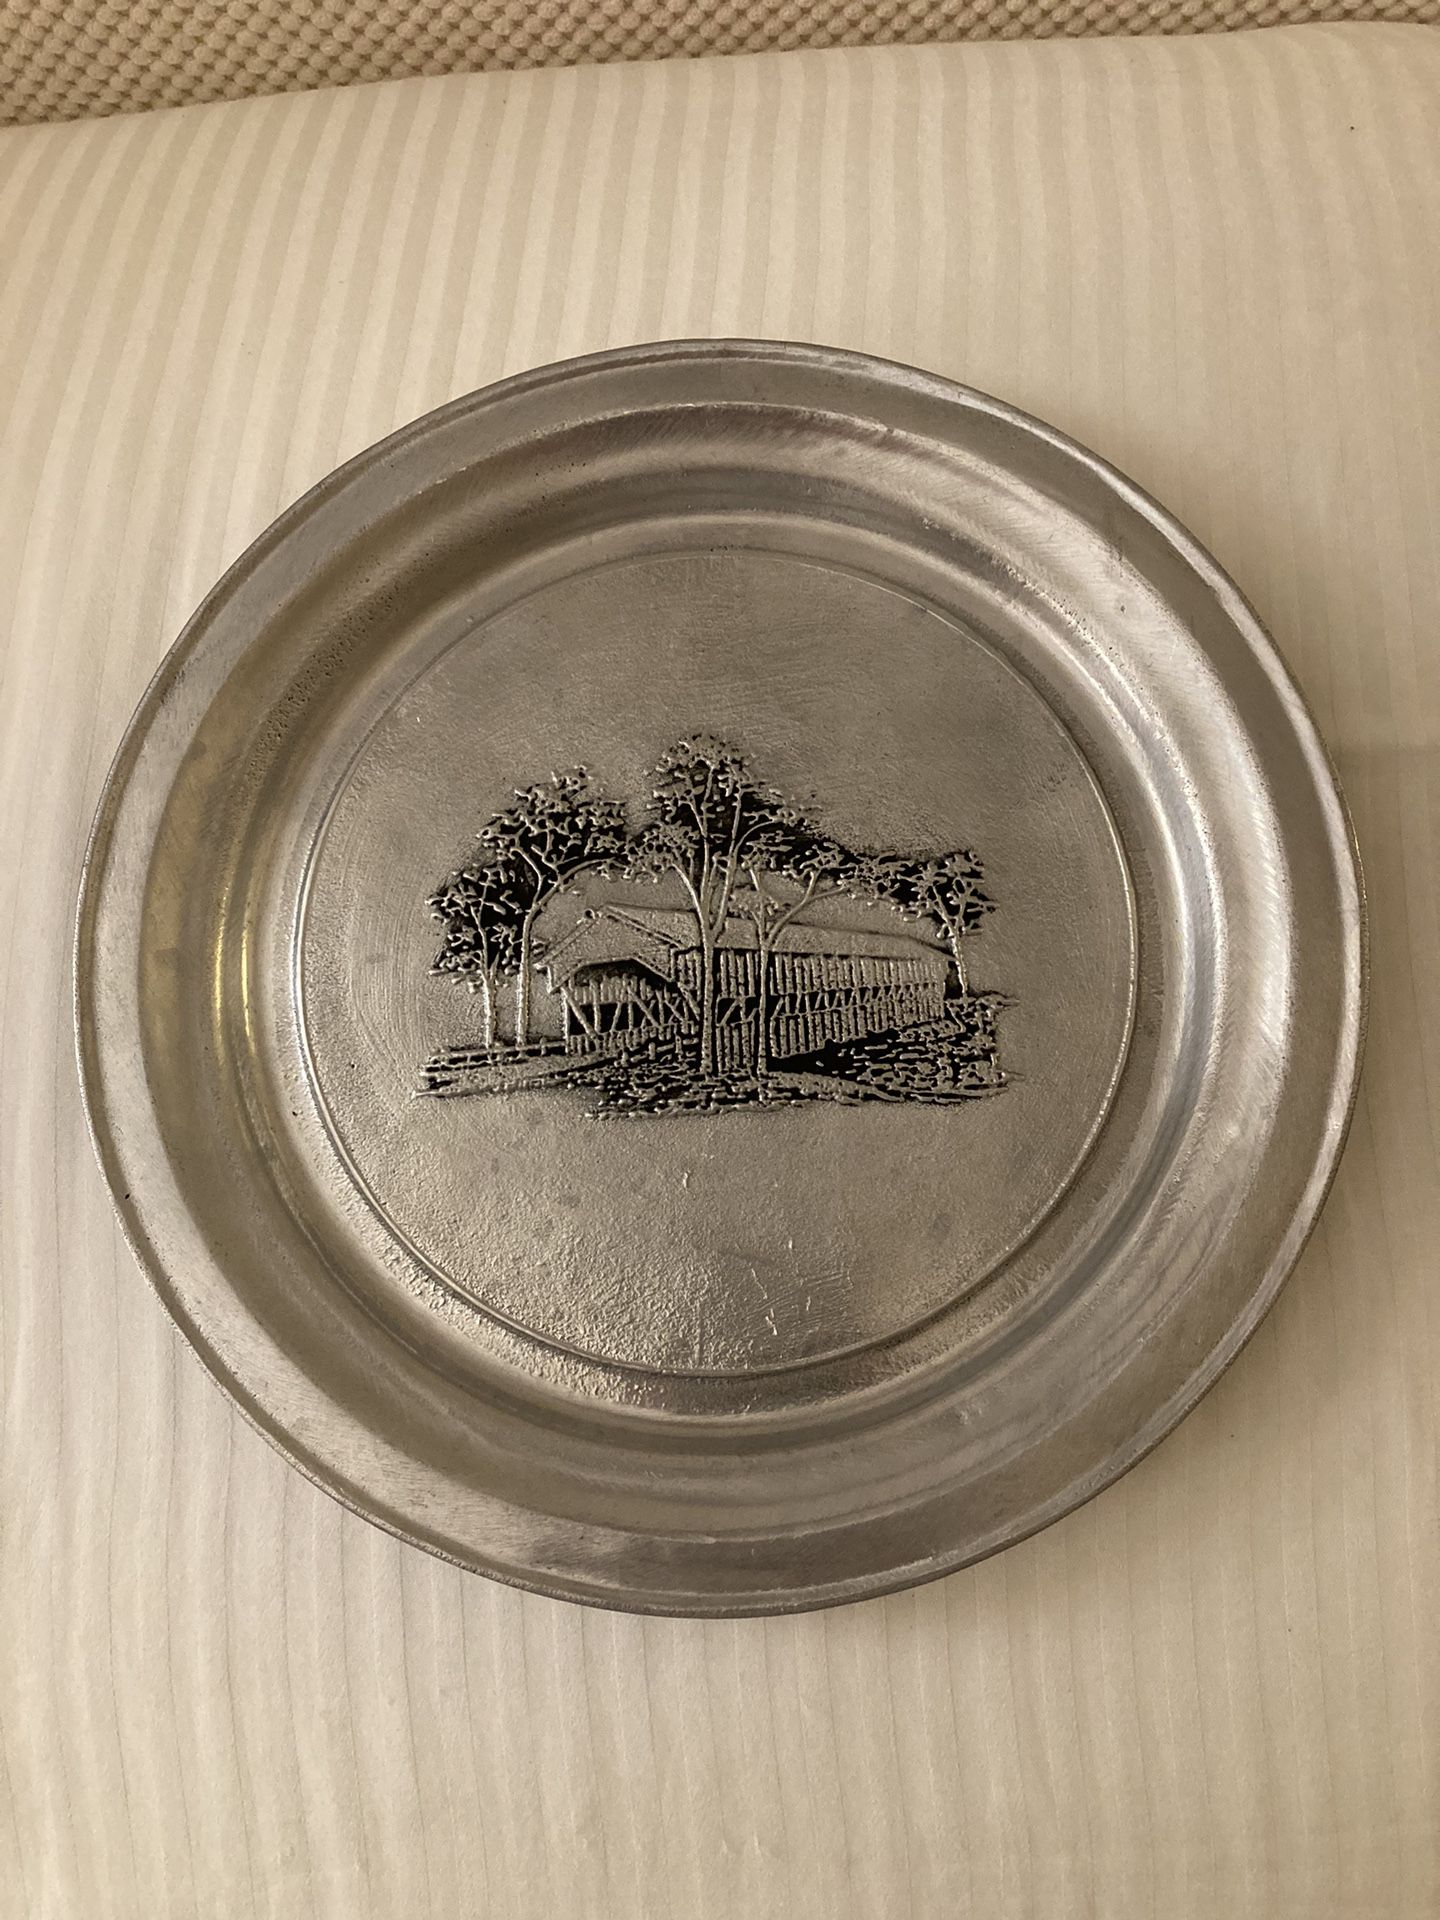 Pewter Plate